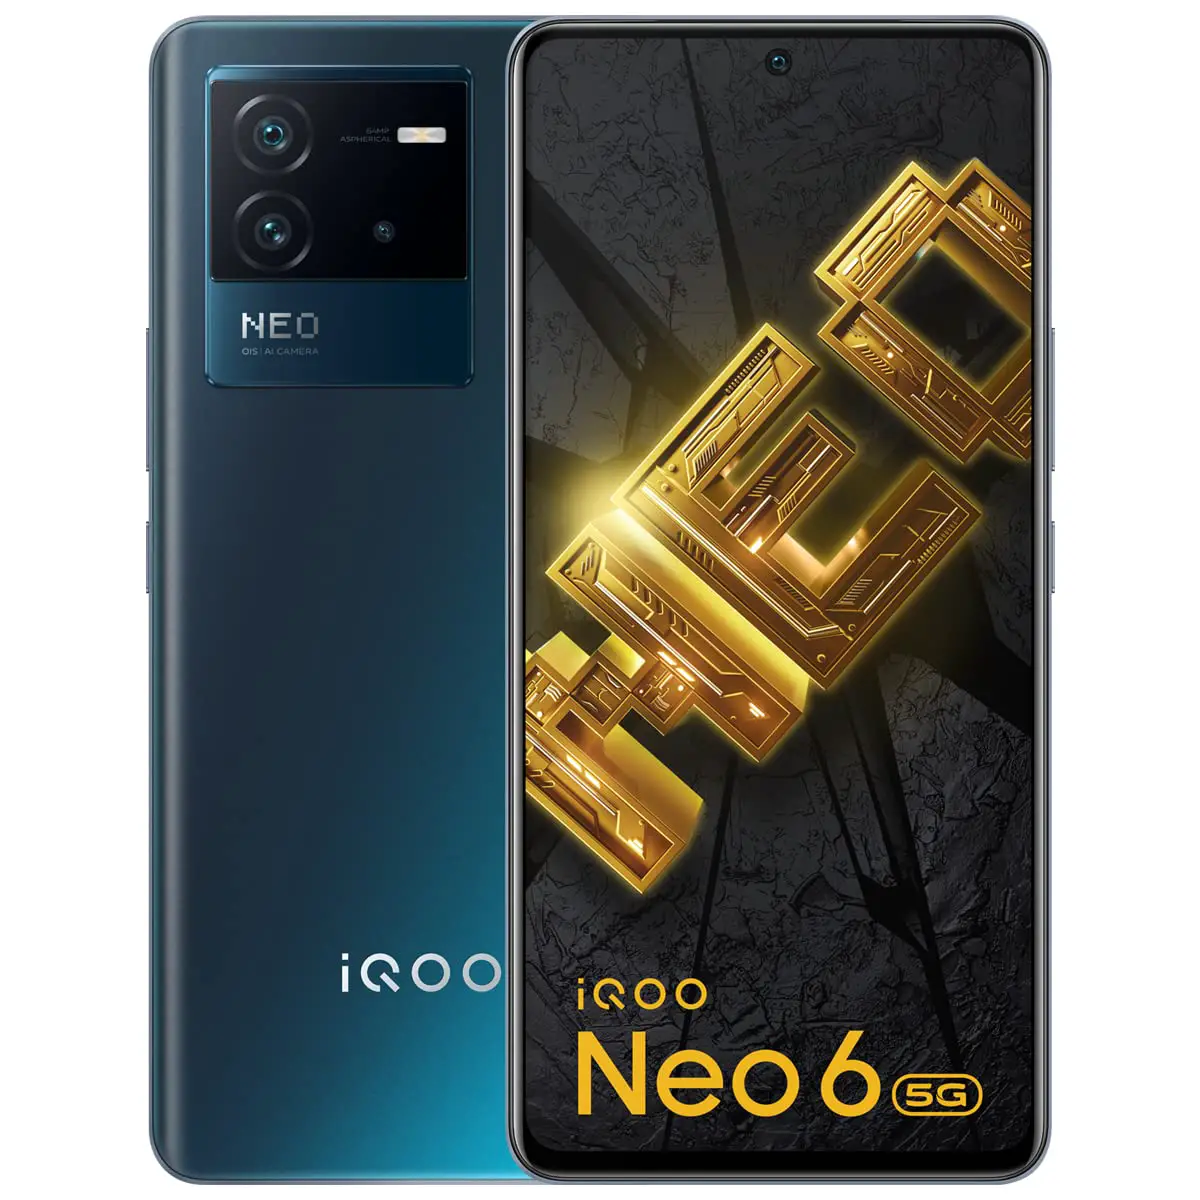 How to Check IMEI Number in IQOO Neo 6 Mobile Phone?